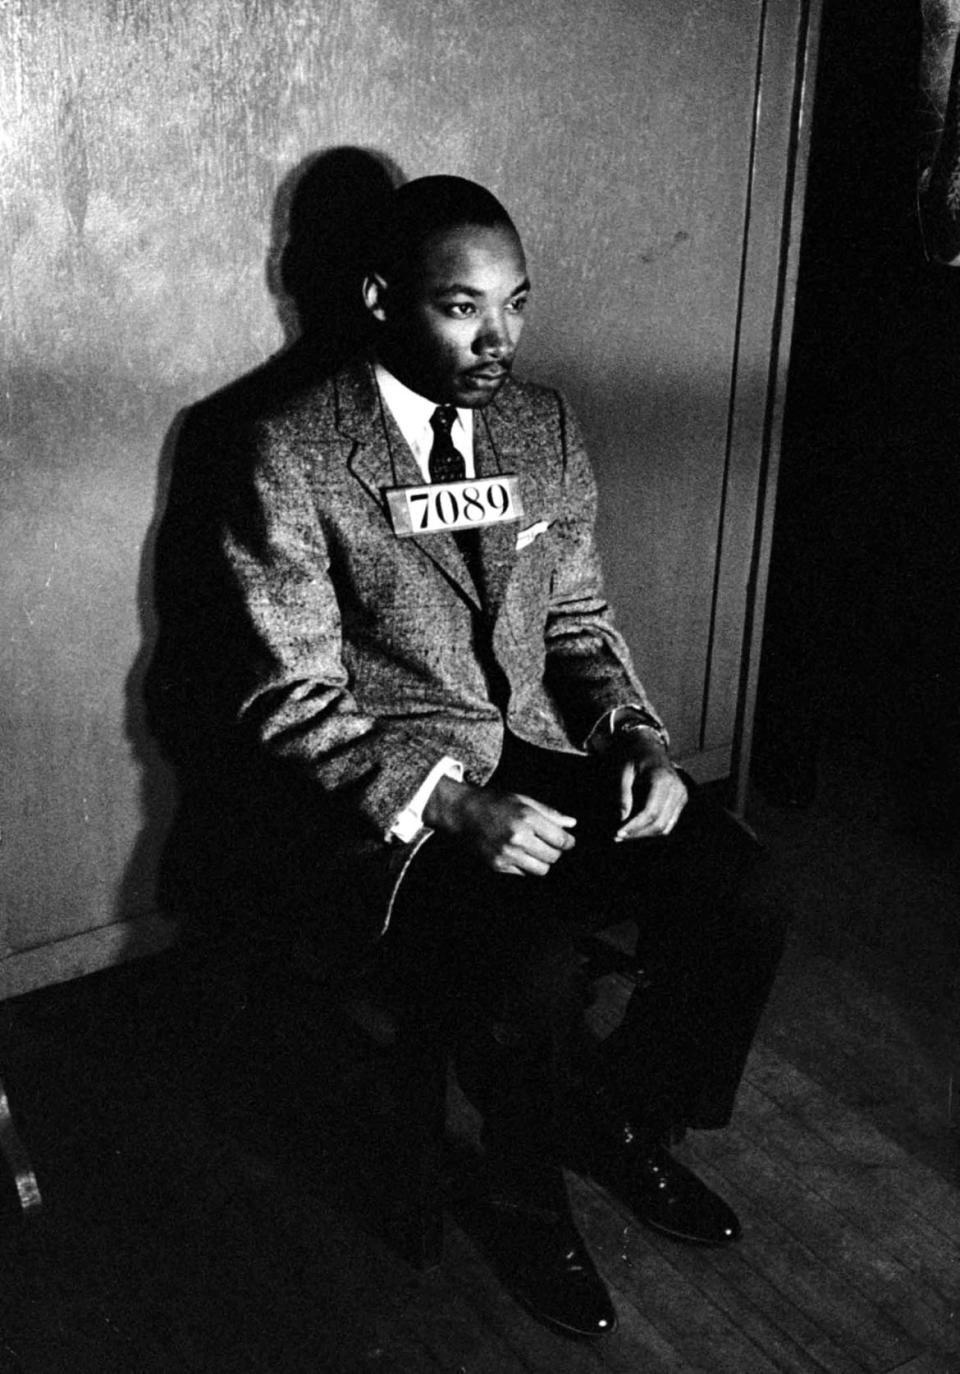 <div class="inline-image__caption"><p>Dr. Martin Luther King Jr. has his mug shot taken at a police station house in Montgomery County, Alabama, following his arrest for directing a city-wide boycott of segregated buses, Feb. 21, 1956.</p></div> <div class="inline-image__credit">Don Cravens/Getty Images</div>